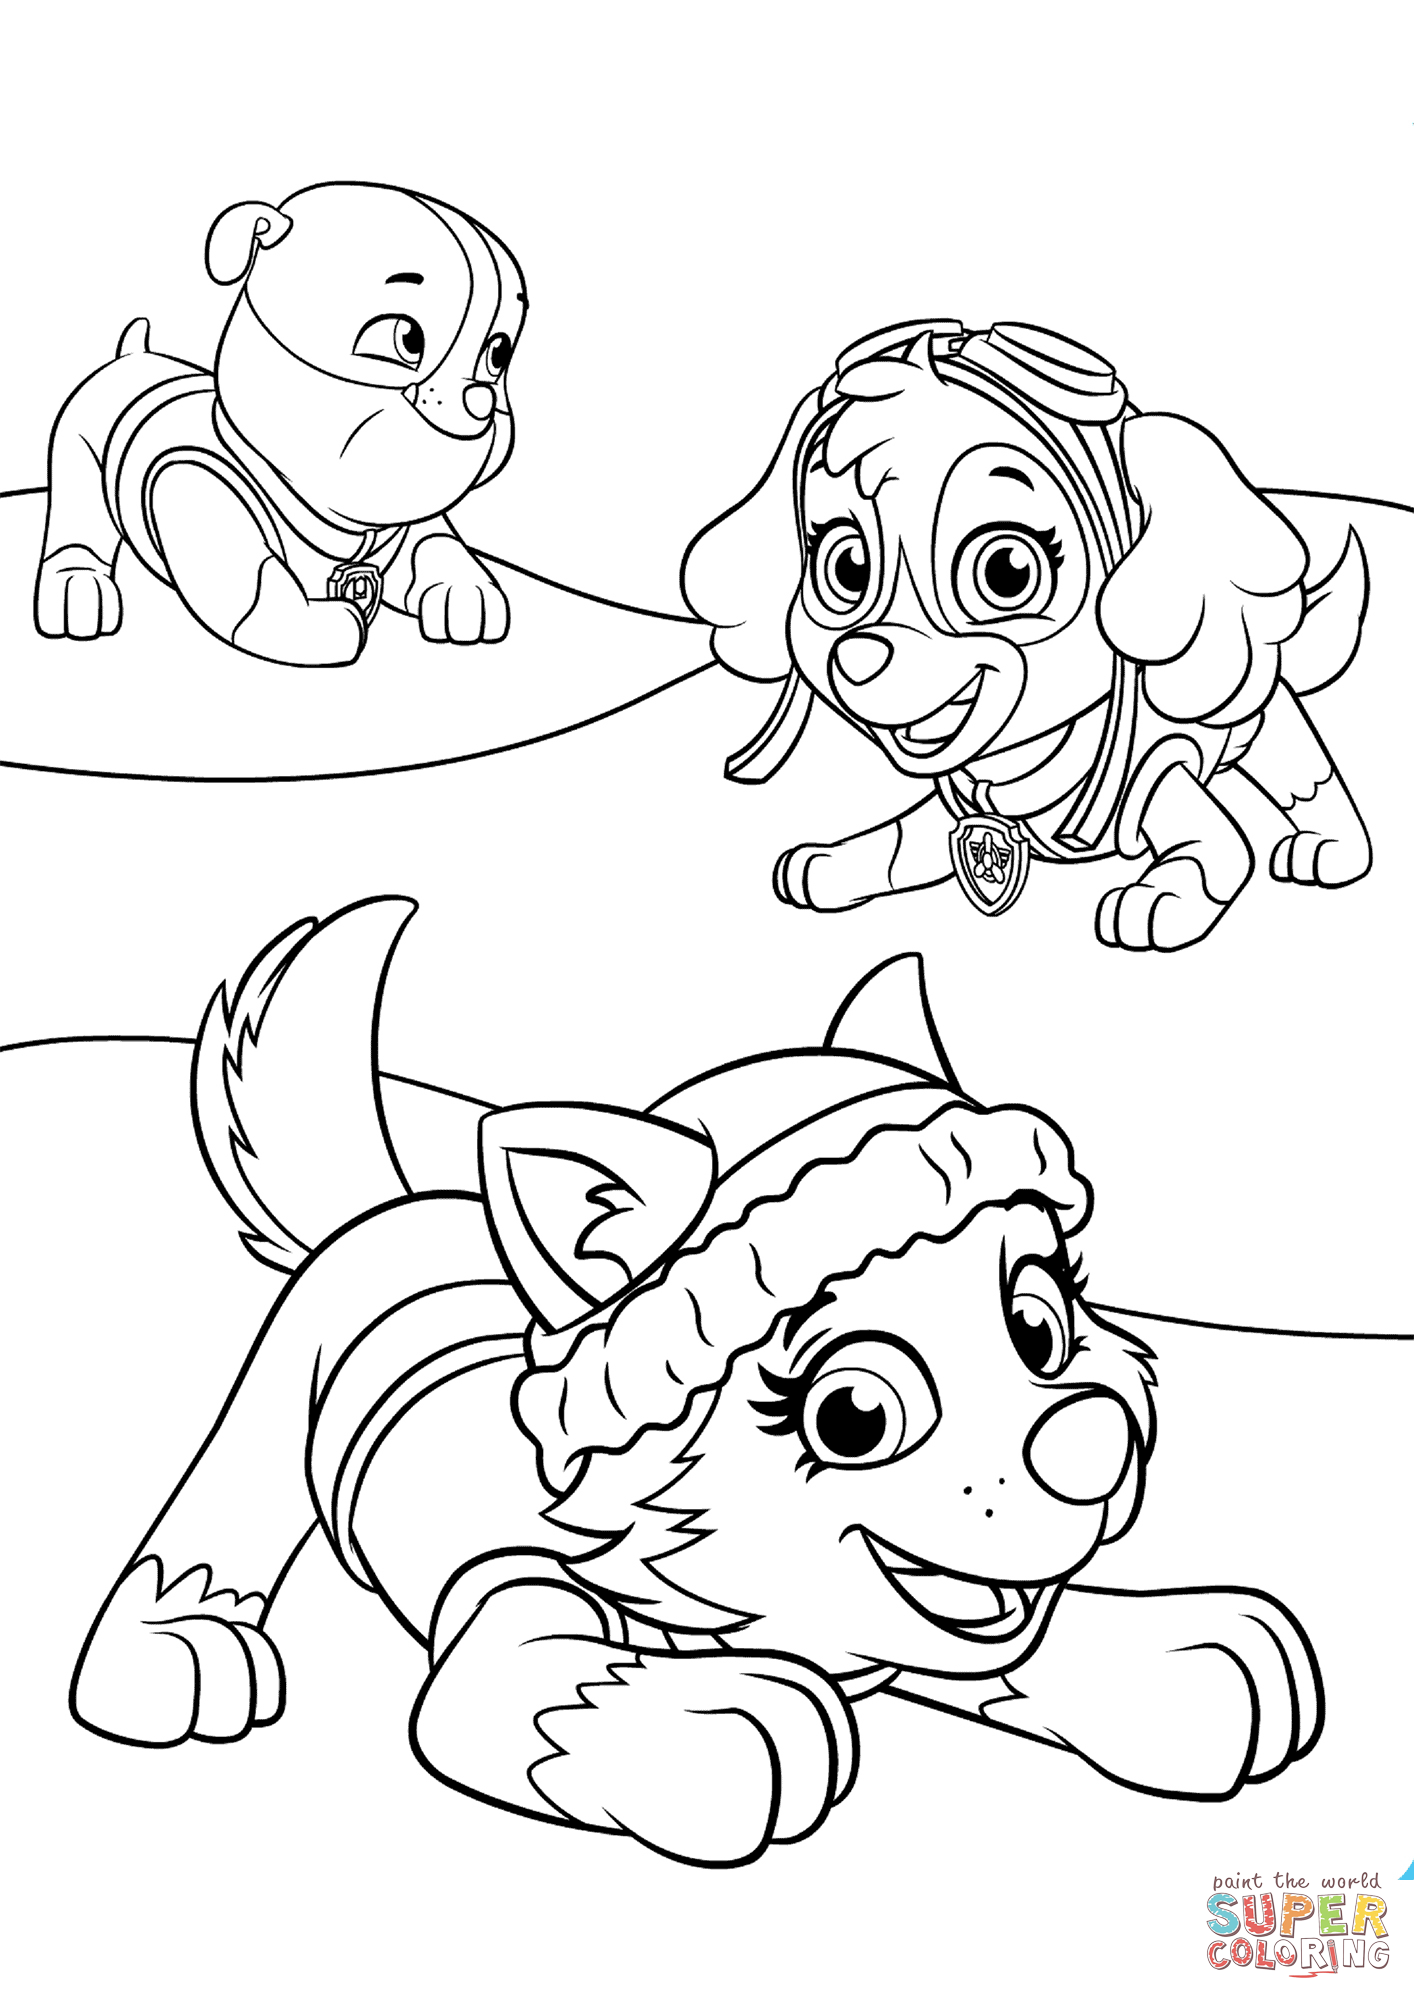 Paw Patrol Coloring Pages FREE Printable 140